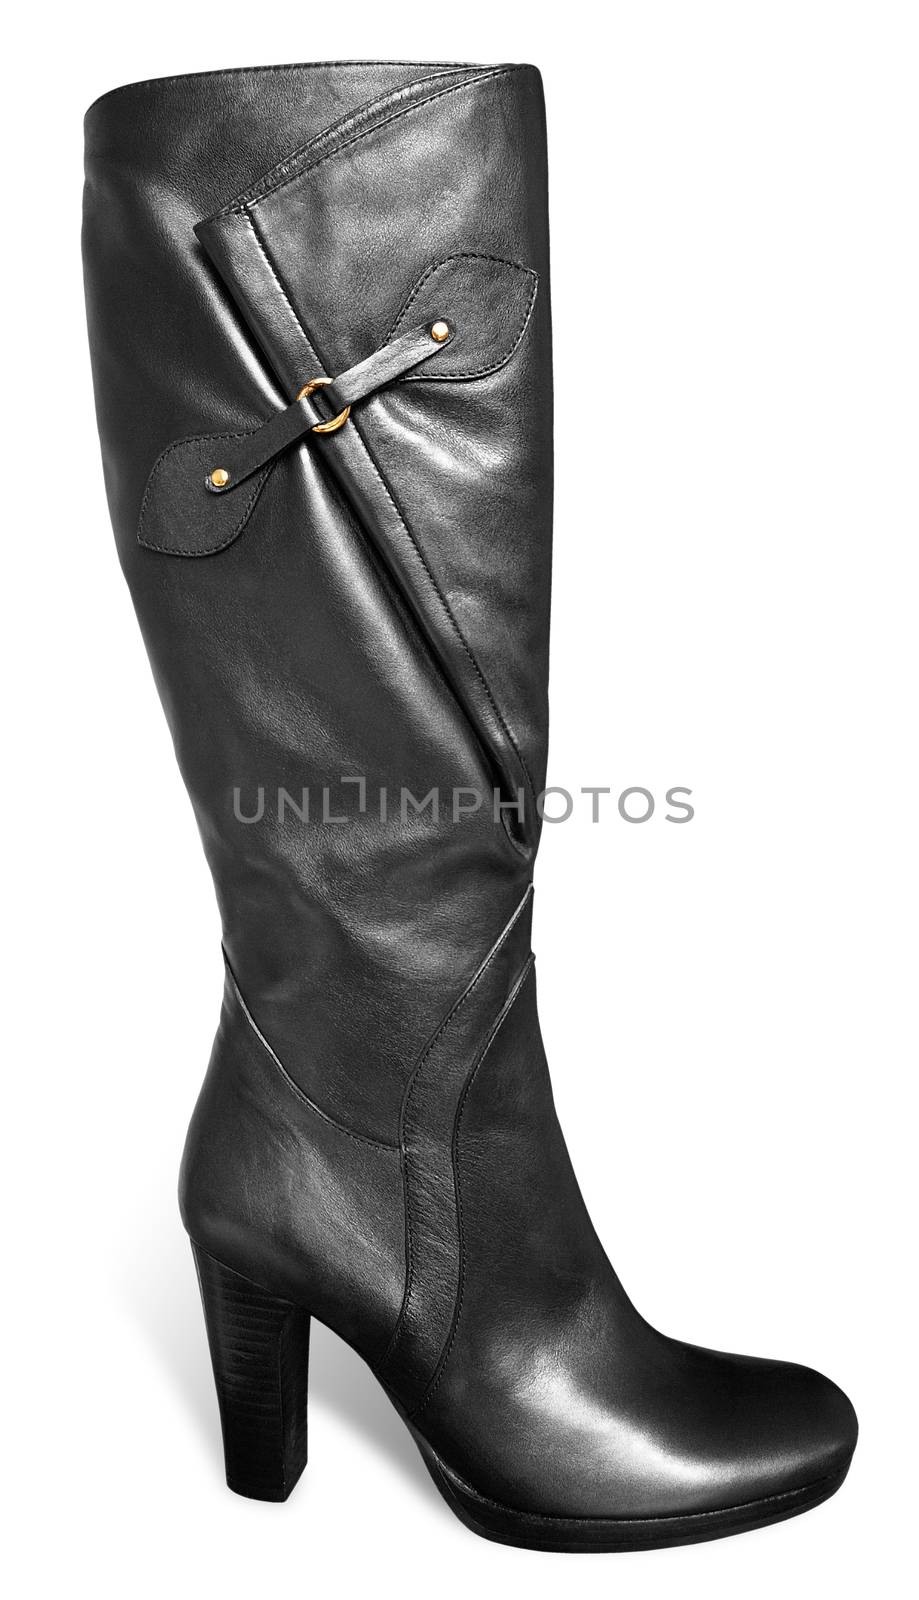 Black top-boot isolated over white background